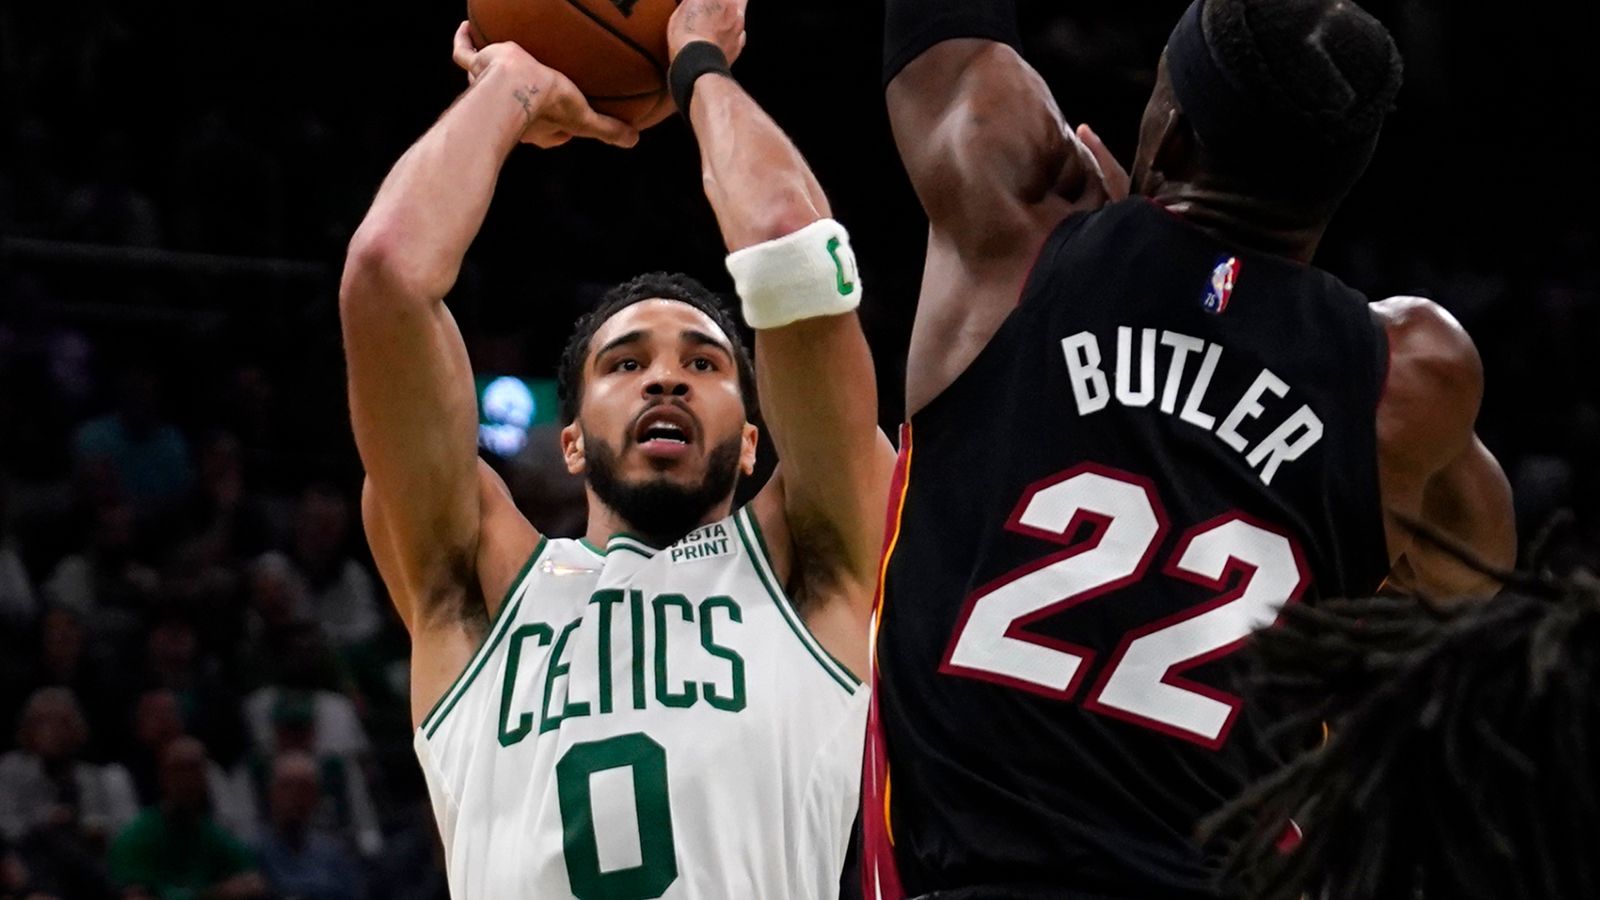 Heat @ Celtics: Jayson Tatum insists Boston needs to treat Game 6 as ‘must-win’ to close out series at home